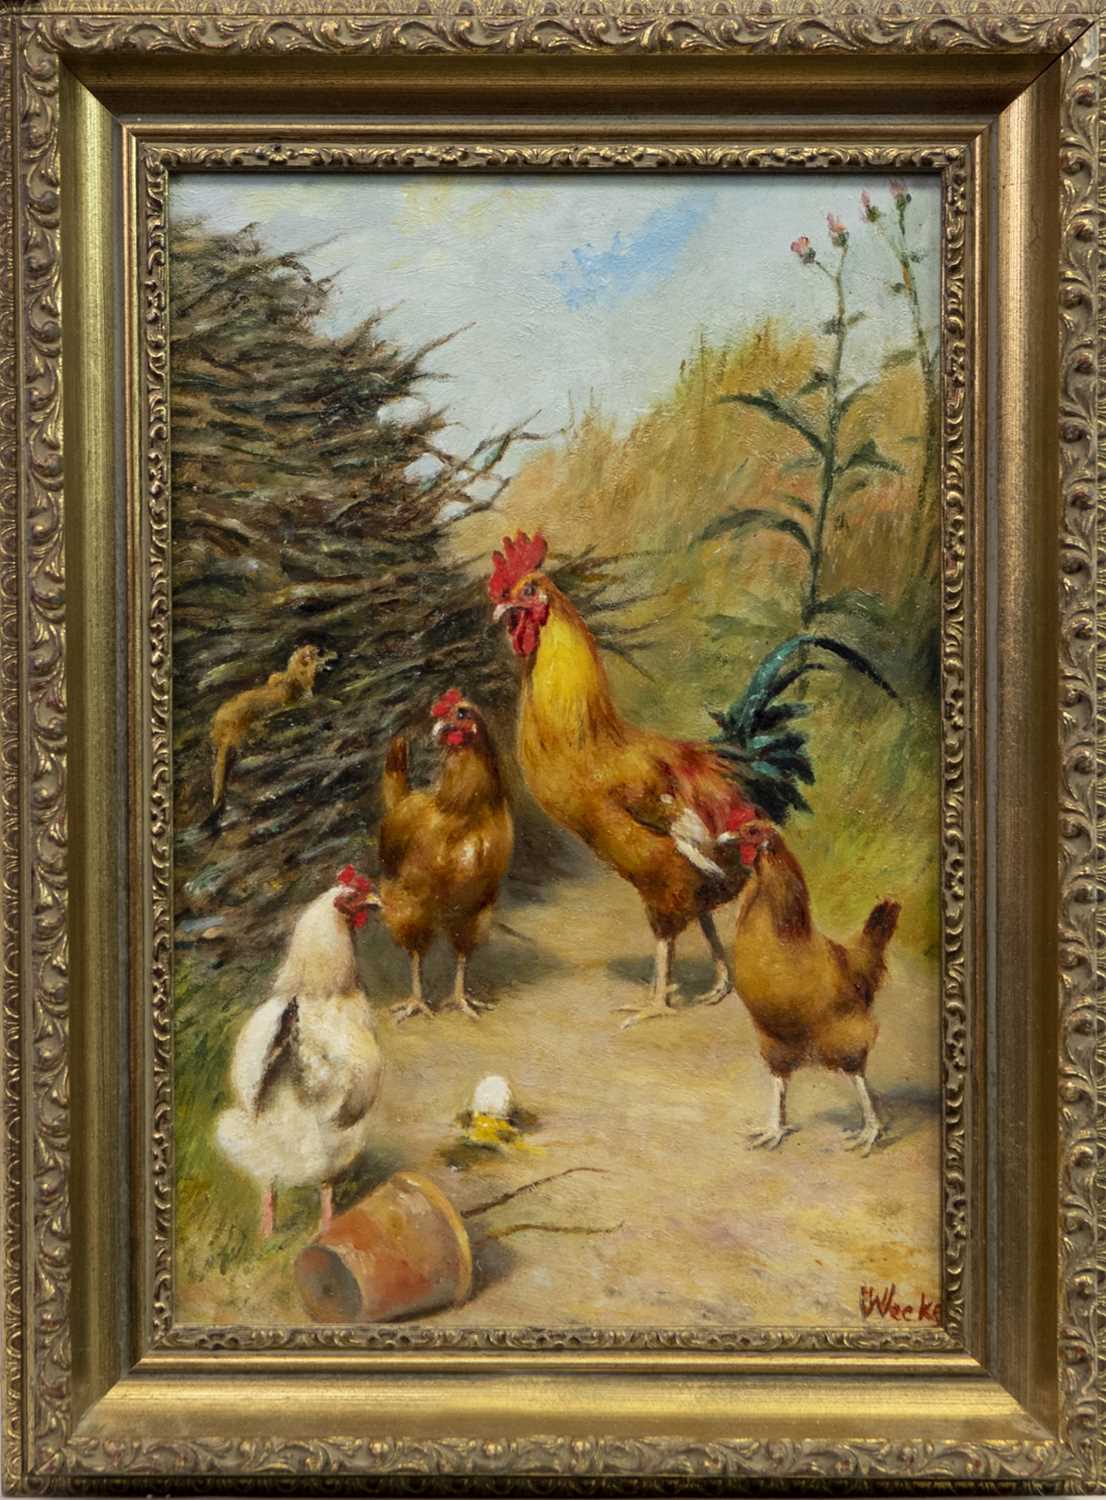 Lot 6 - HENS AND COCKEREL, AN OIL BY HERBERT WILLIAM WEEKES